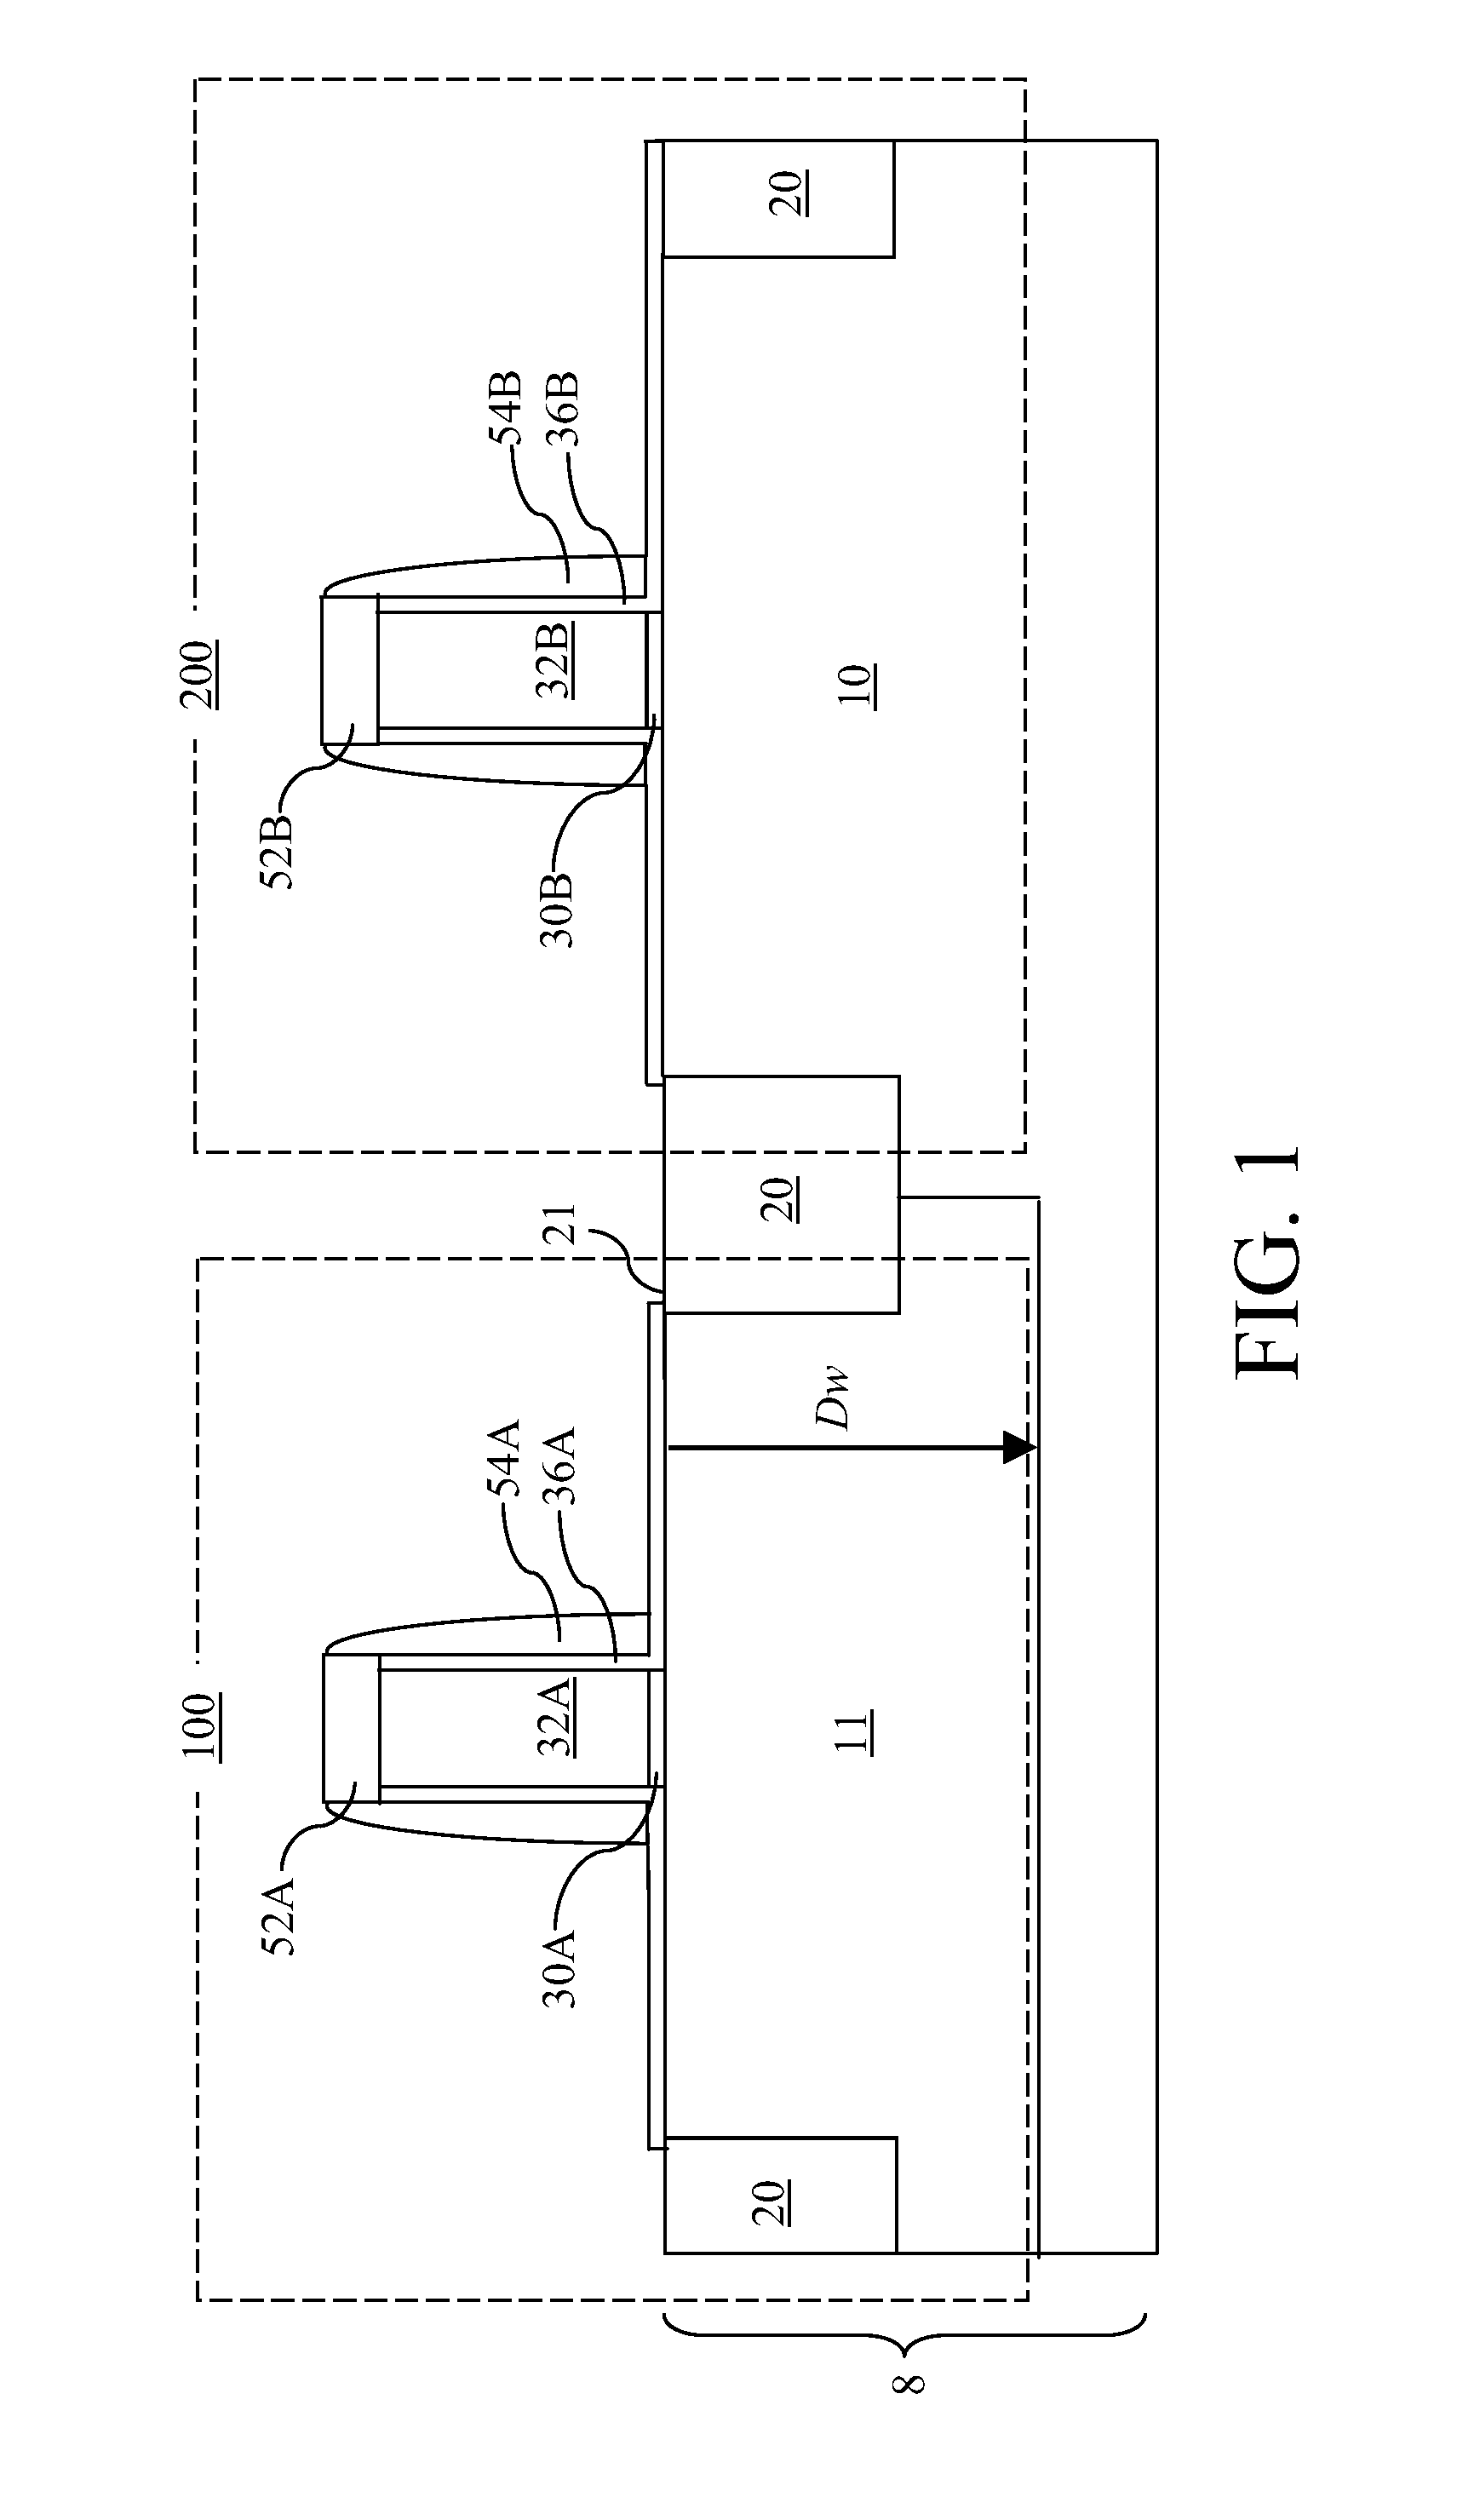 Metal semiconductor alloy structure for low contact resistance